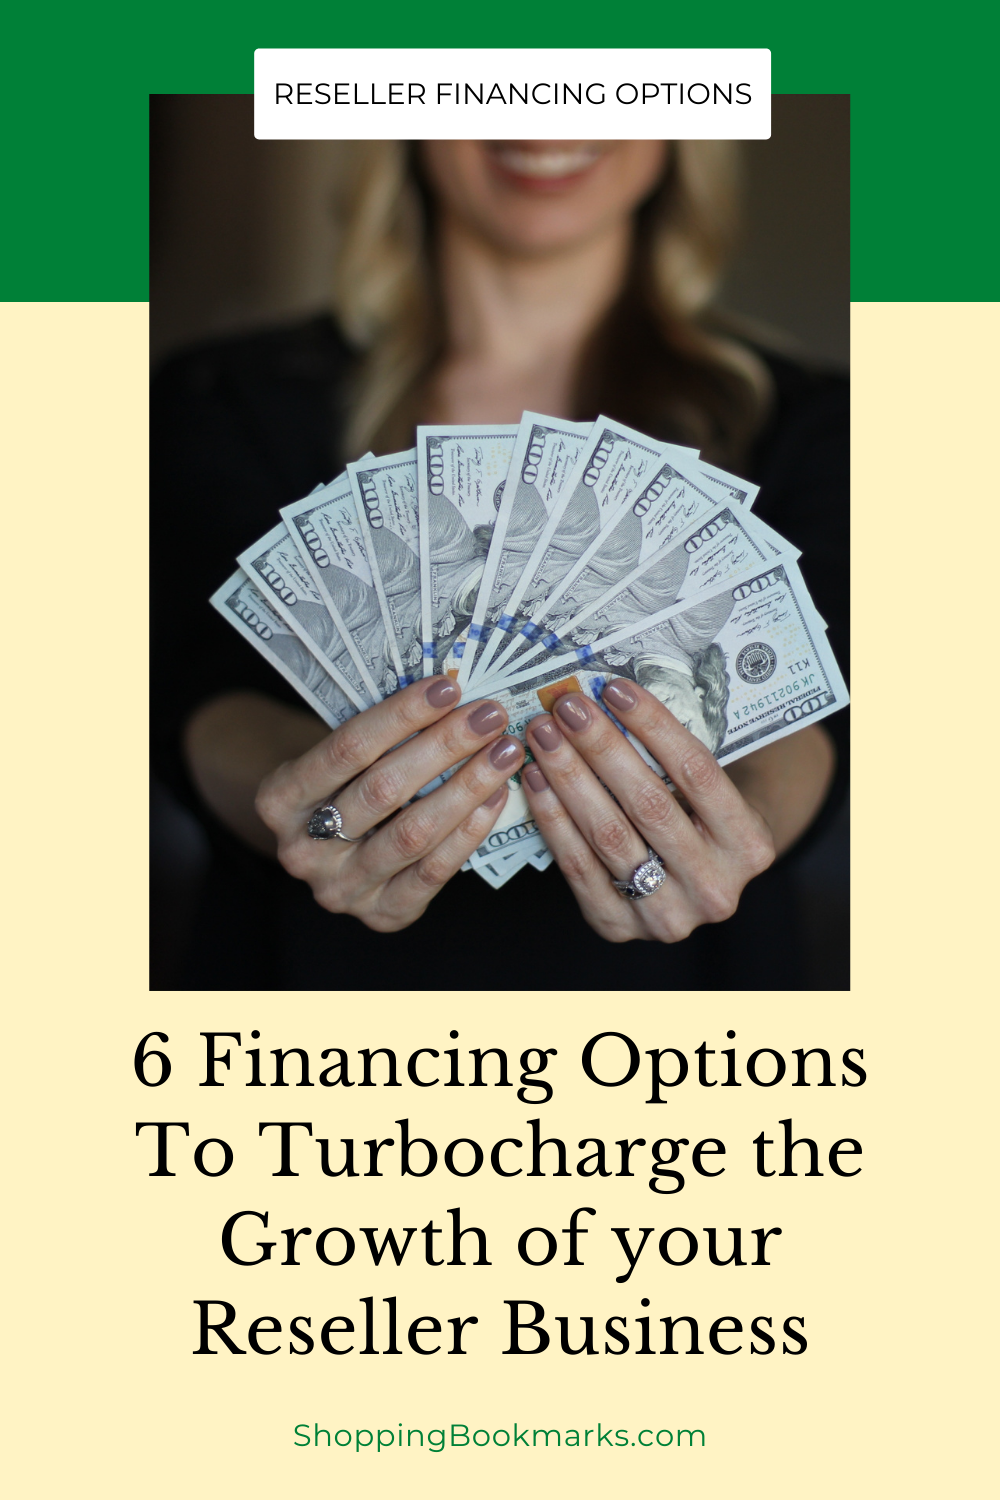 6 Financing Options To Turbocharge the Growth of your Reseller Business